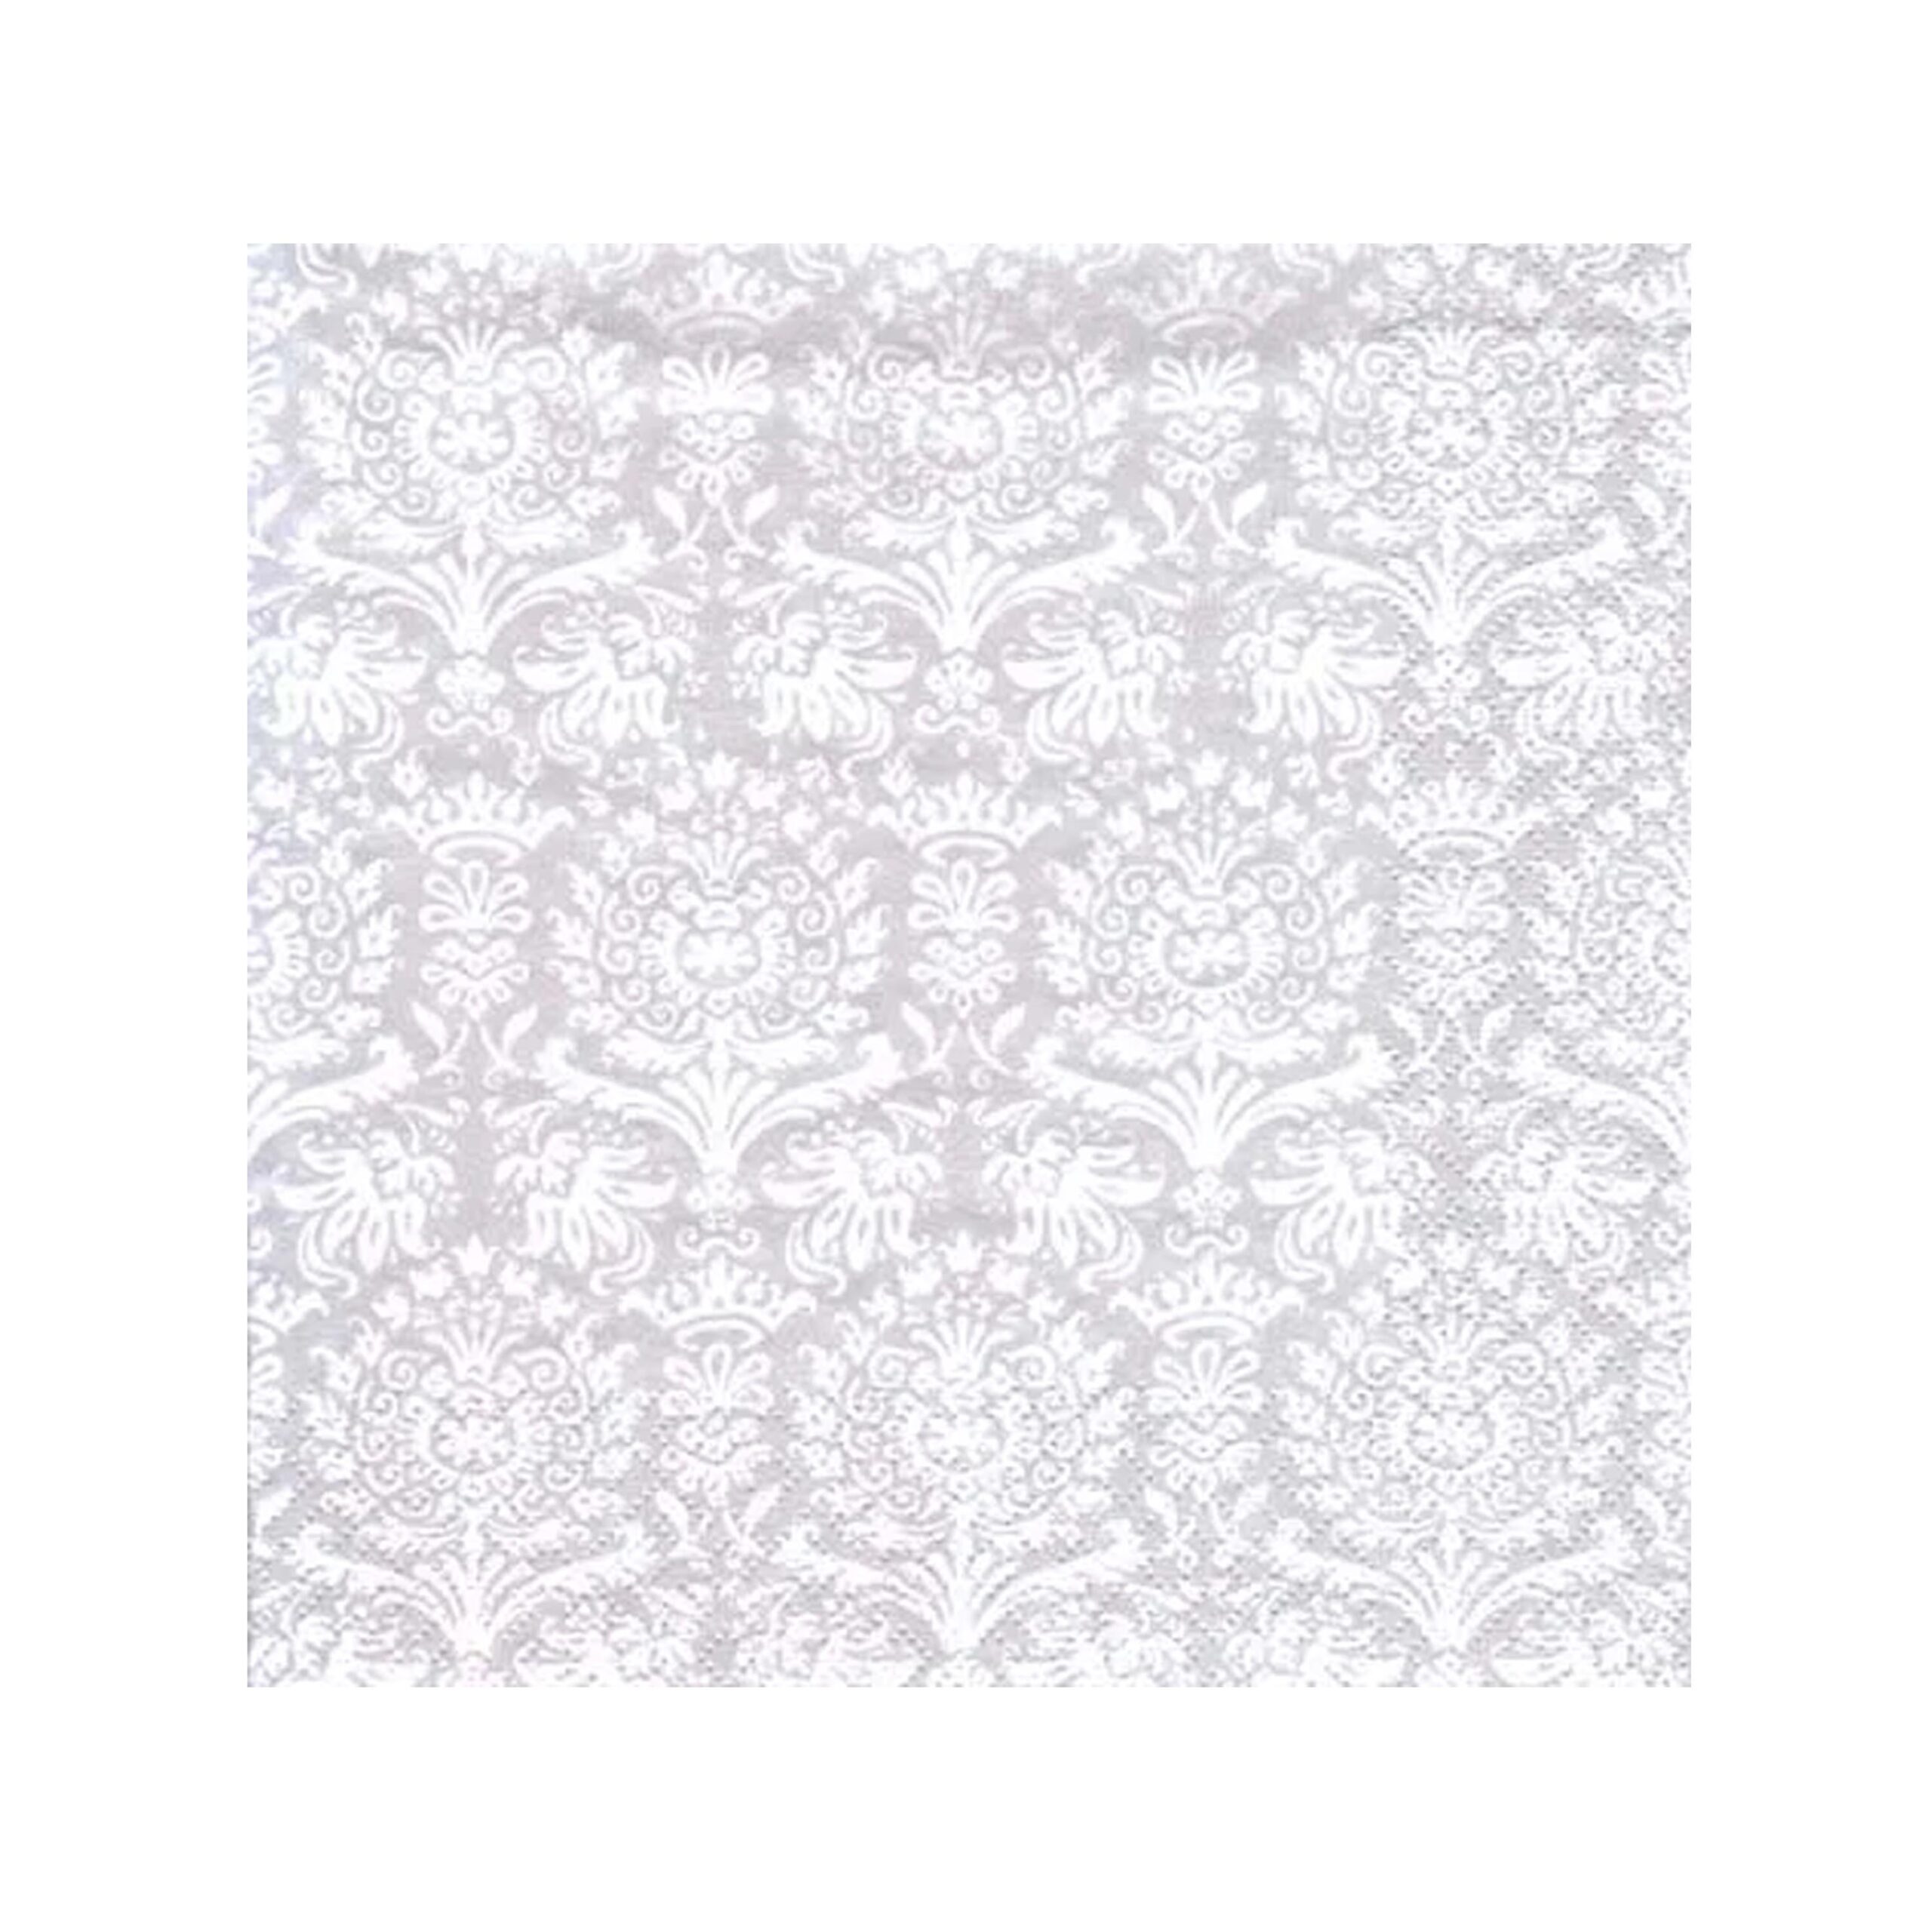 3 PLY LUNCH
SERVIETTES 33X33
ROYAL DAMASK
SILVER 20s